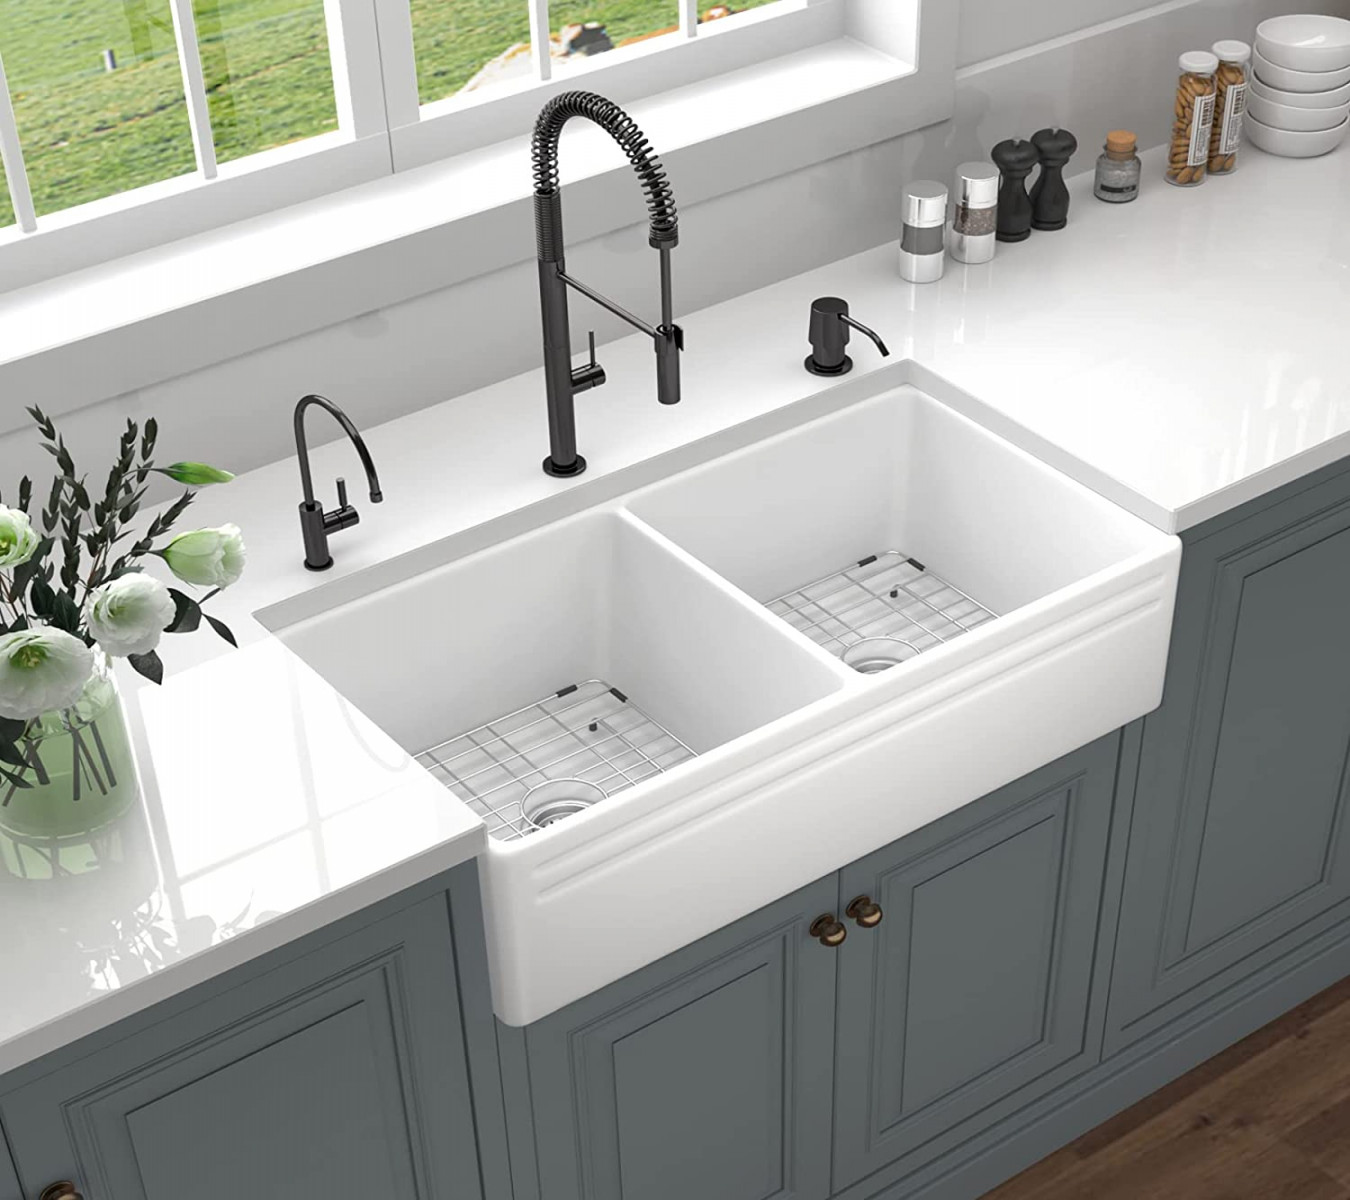 ALWEN " Fireclay Farmhouse Sink Double Bowl Apron Front Farmhouse Kitchen  Sink Recyclable White Fireclay Kitchen Sink with  Stainless Steel Grids